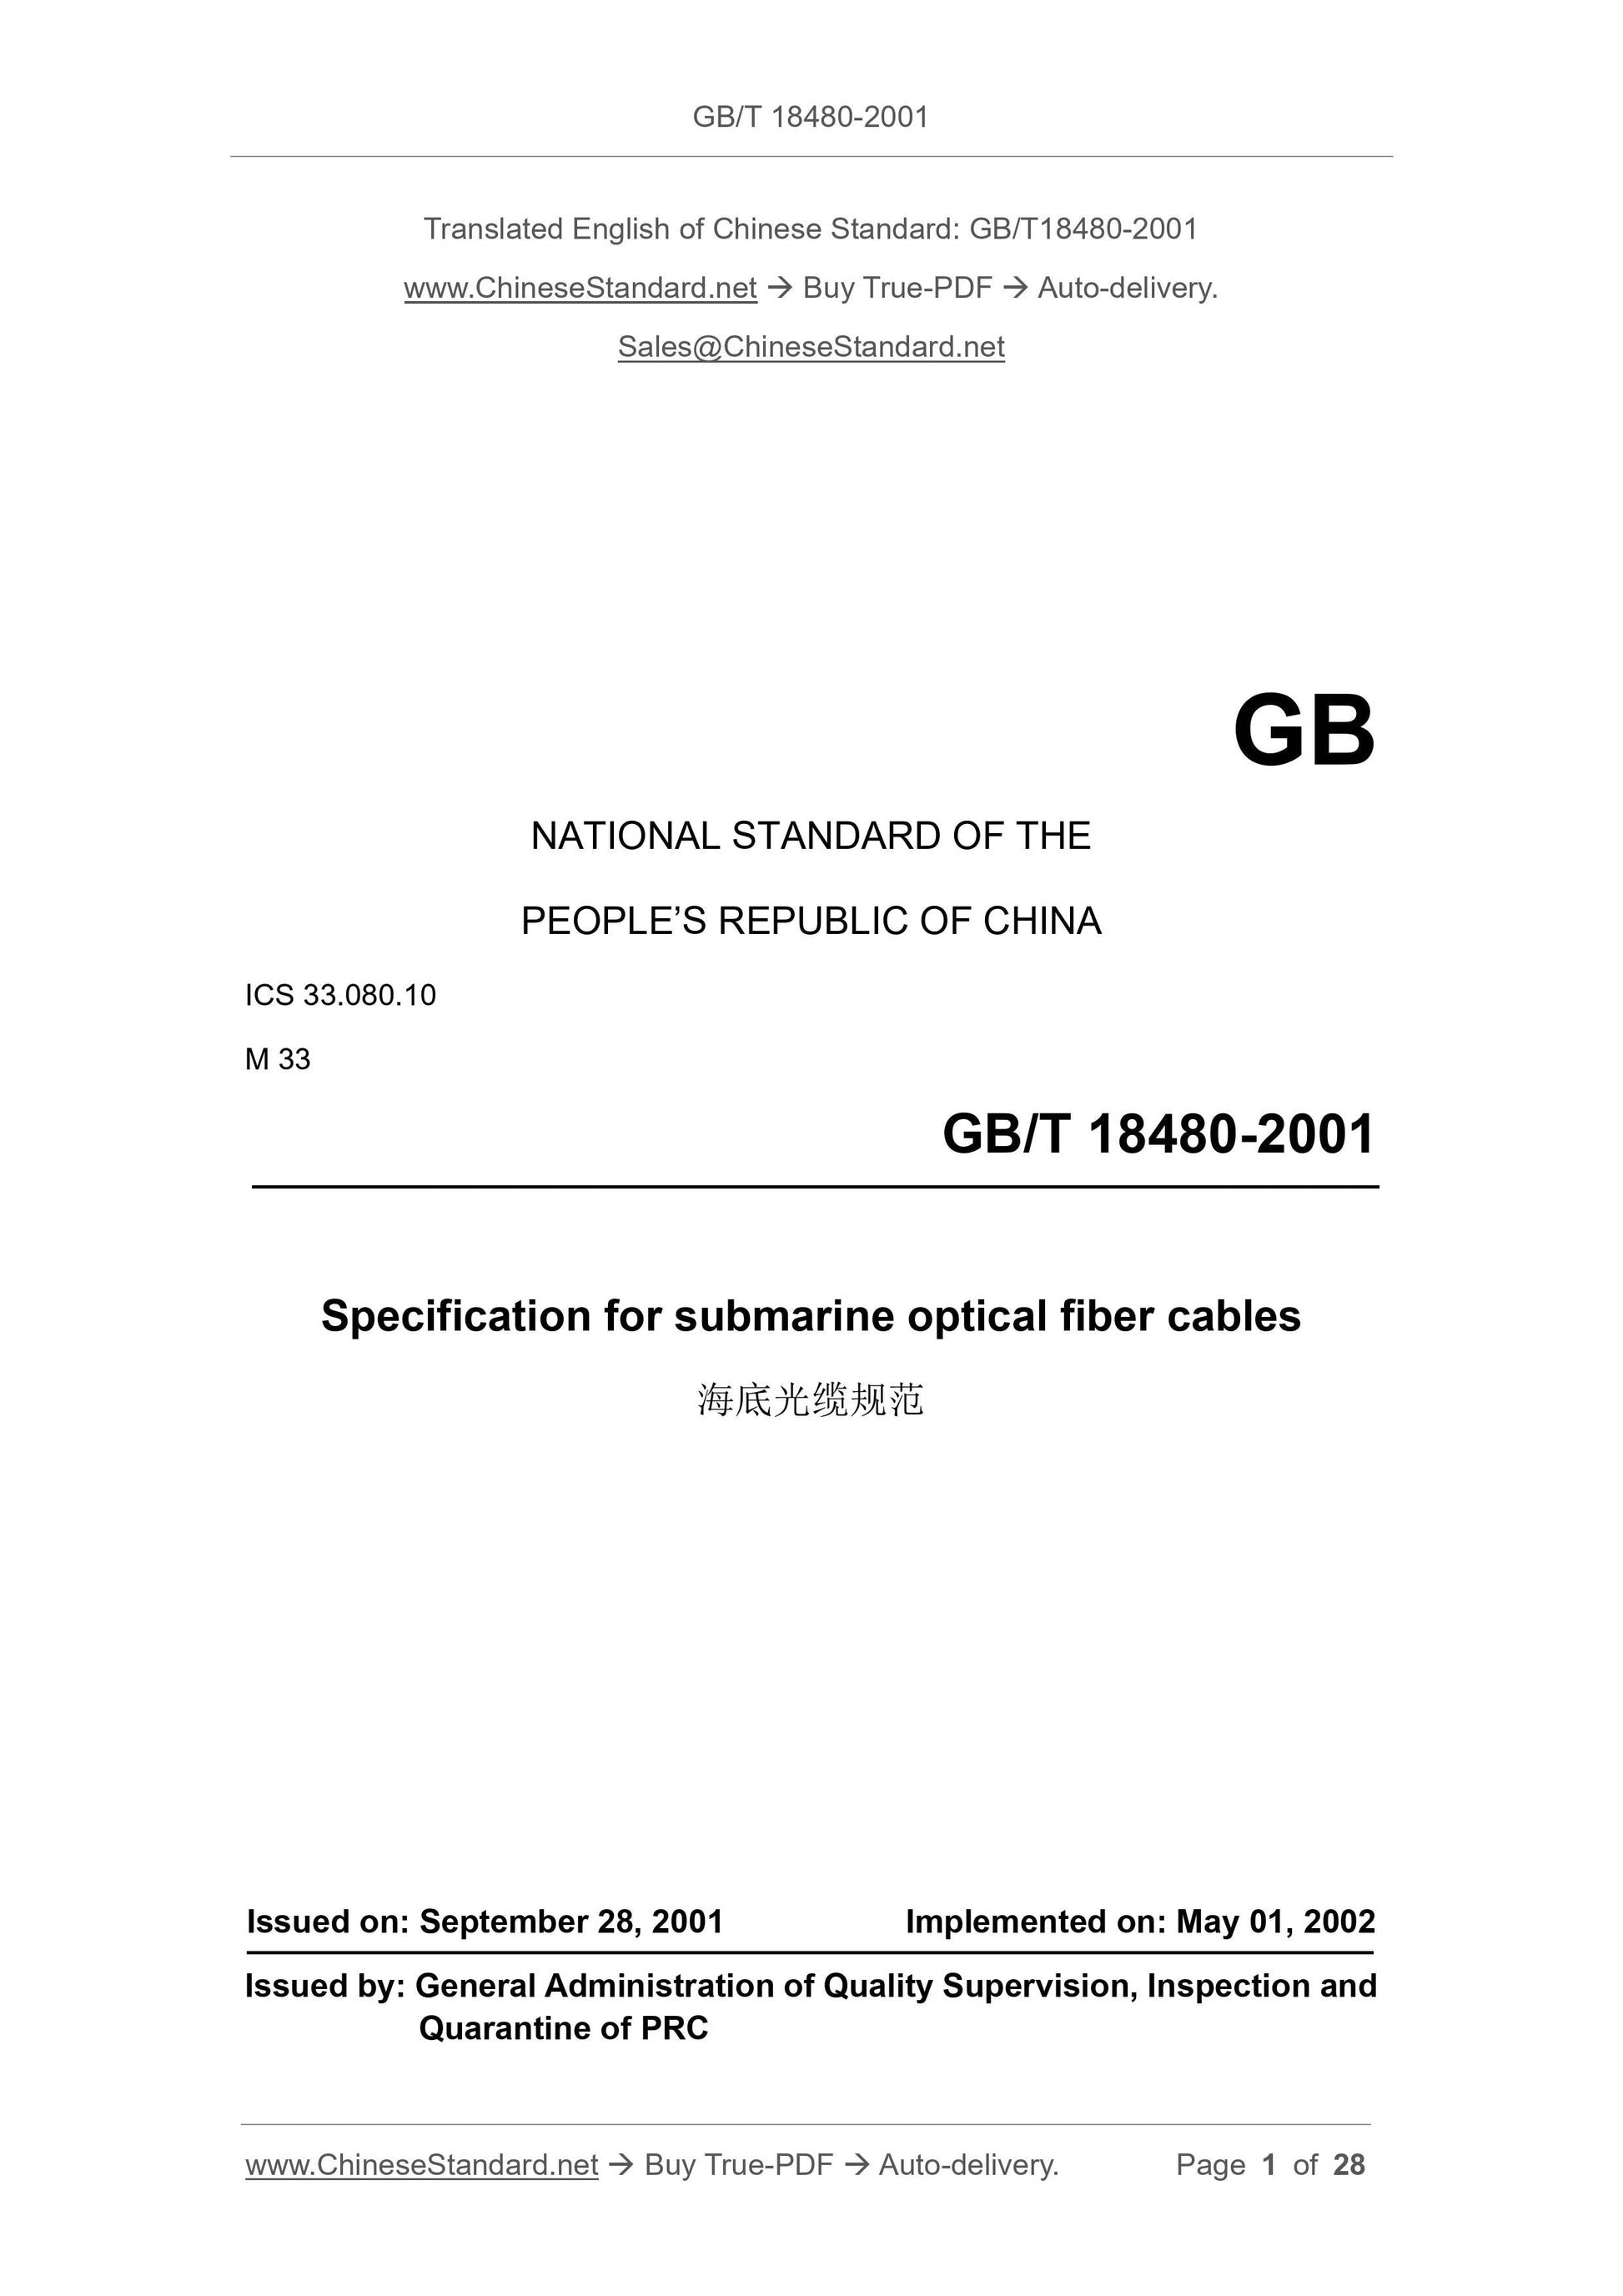 GB/T 18480-2001 Page 1